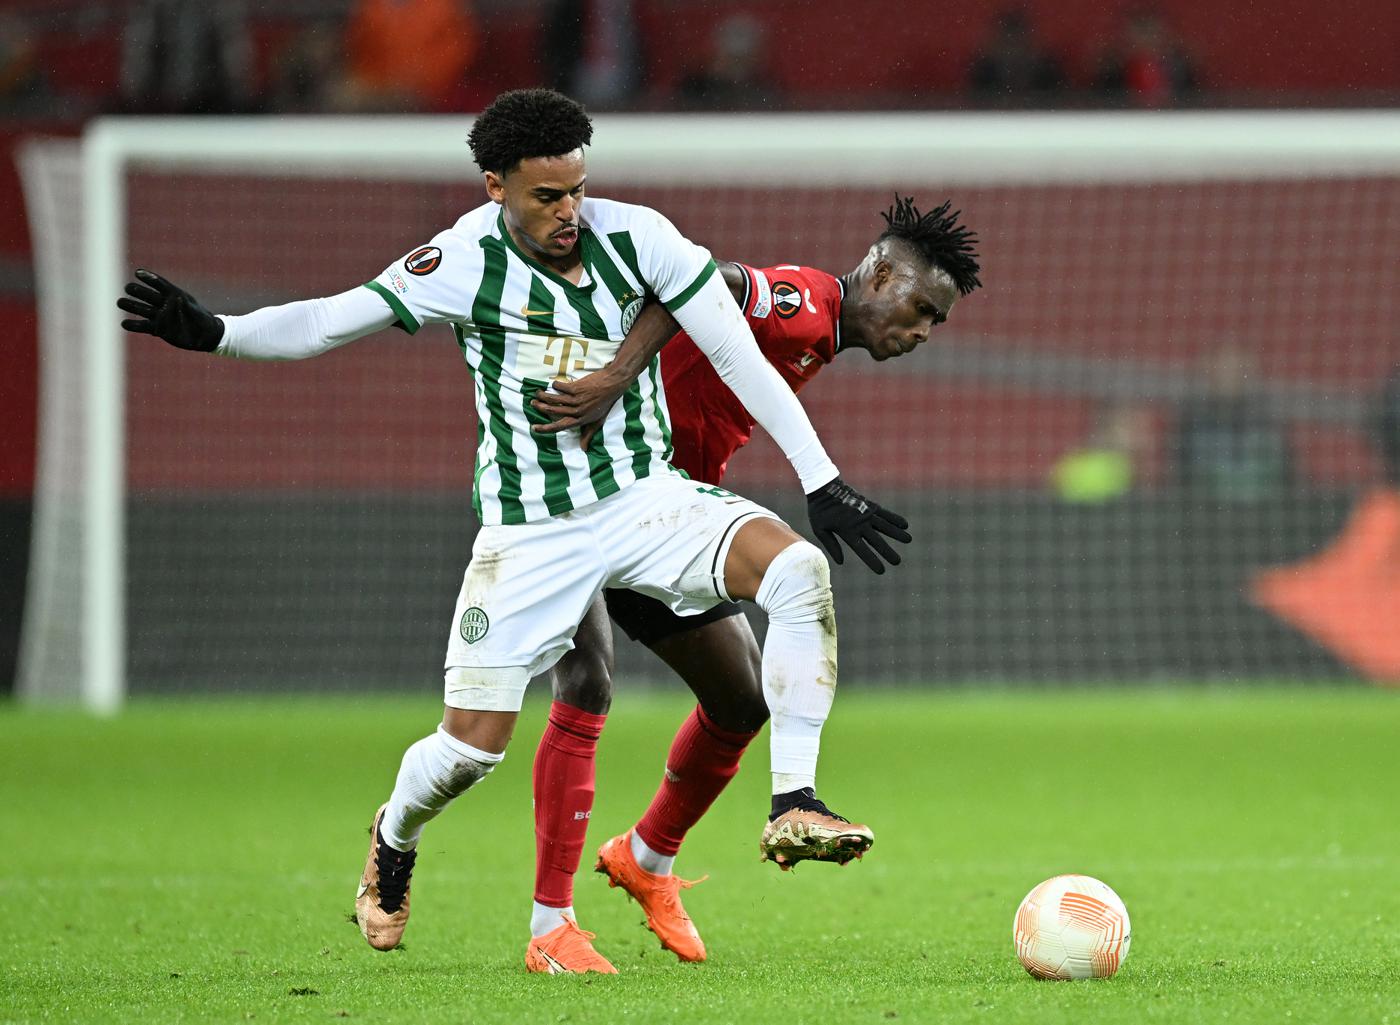 Bayer - Ferencvaros - 2:0. Europa League. Match review, statistics (March  9, 2023) —